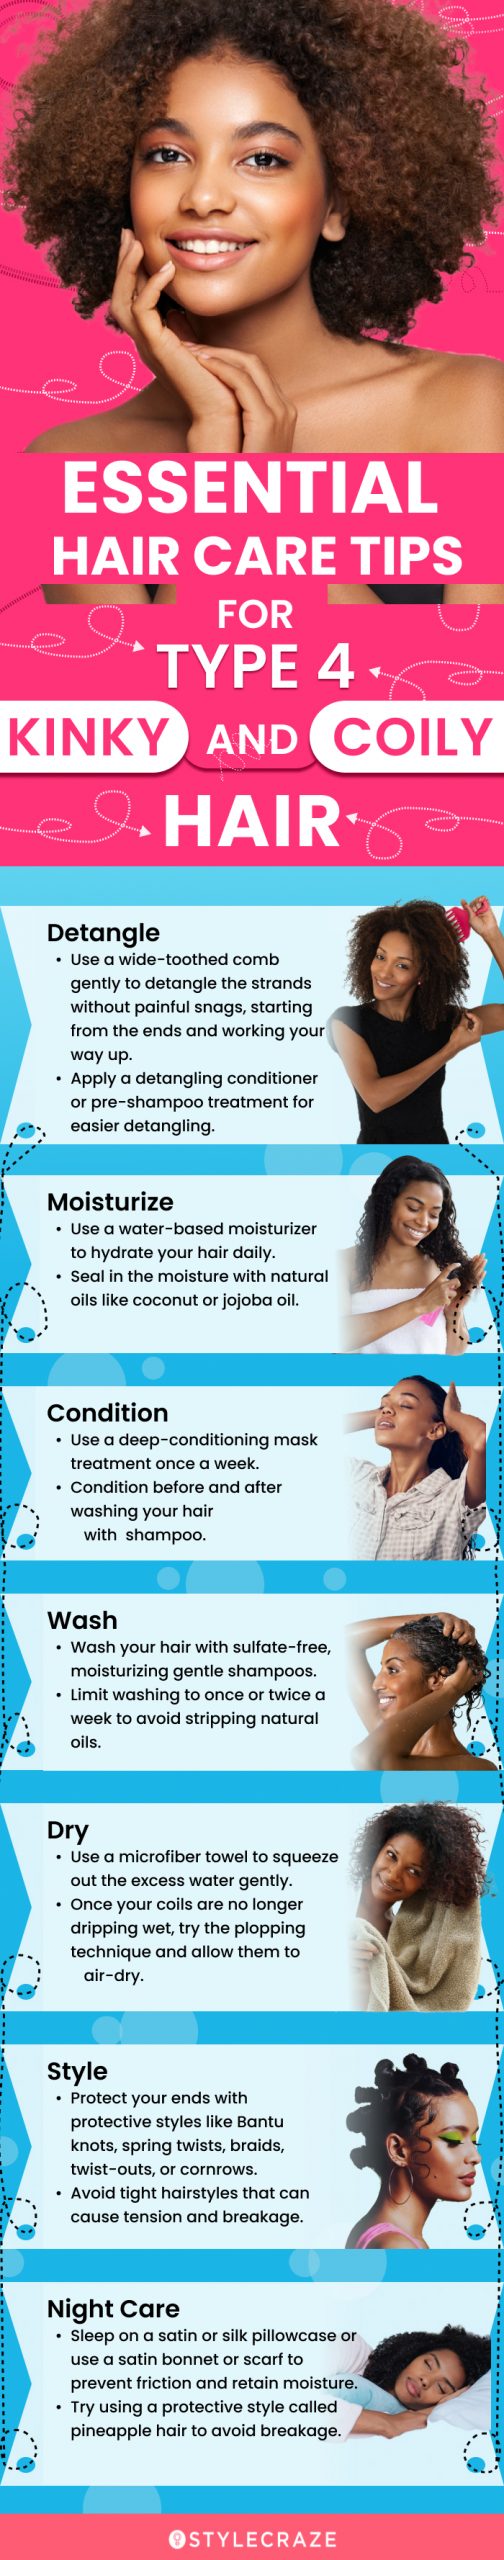 Essential Haircare Tips For Type 4 Kinky (infographic)